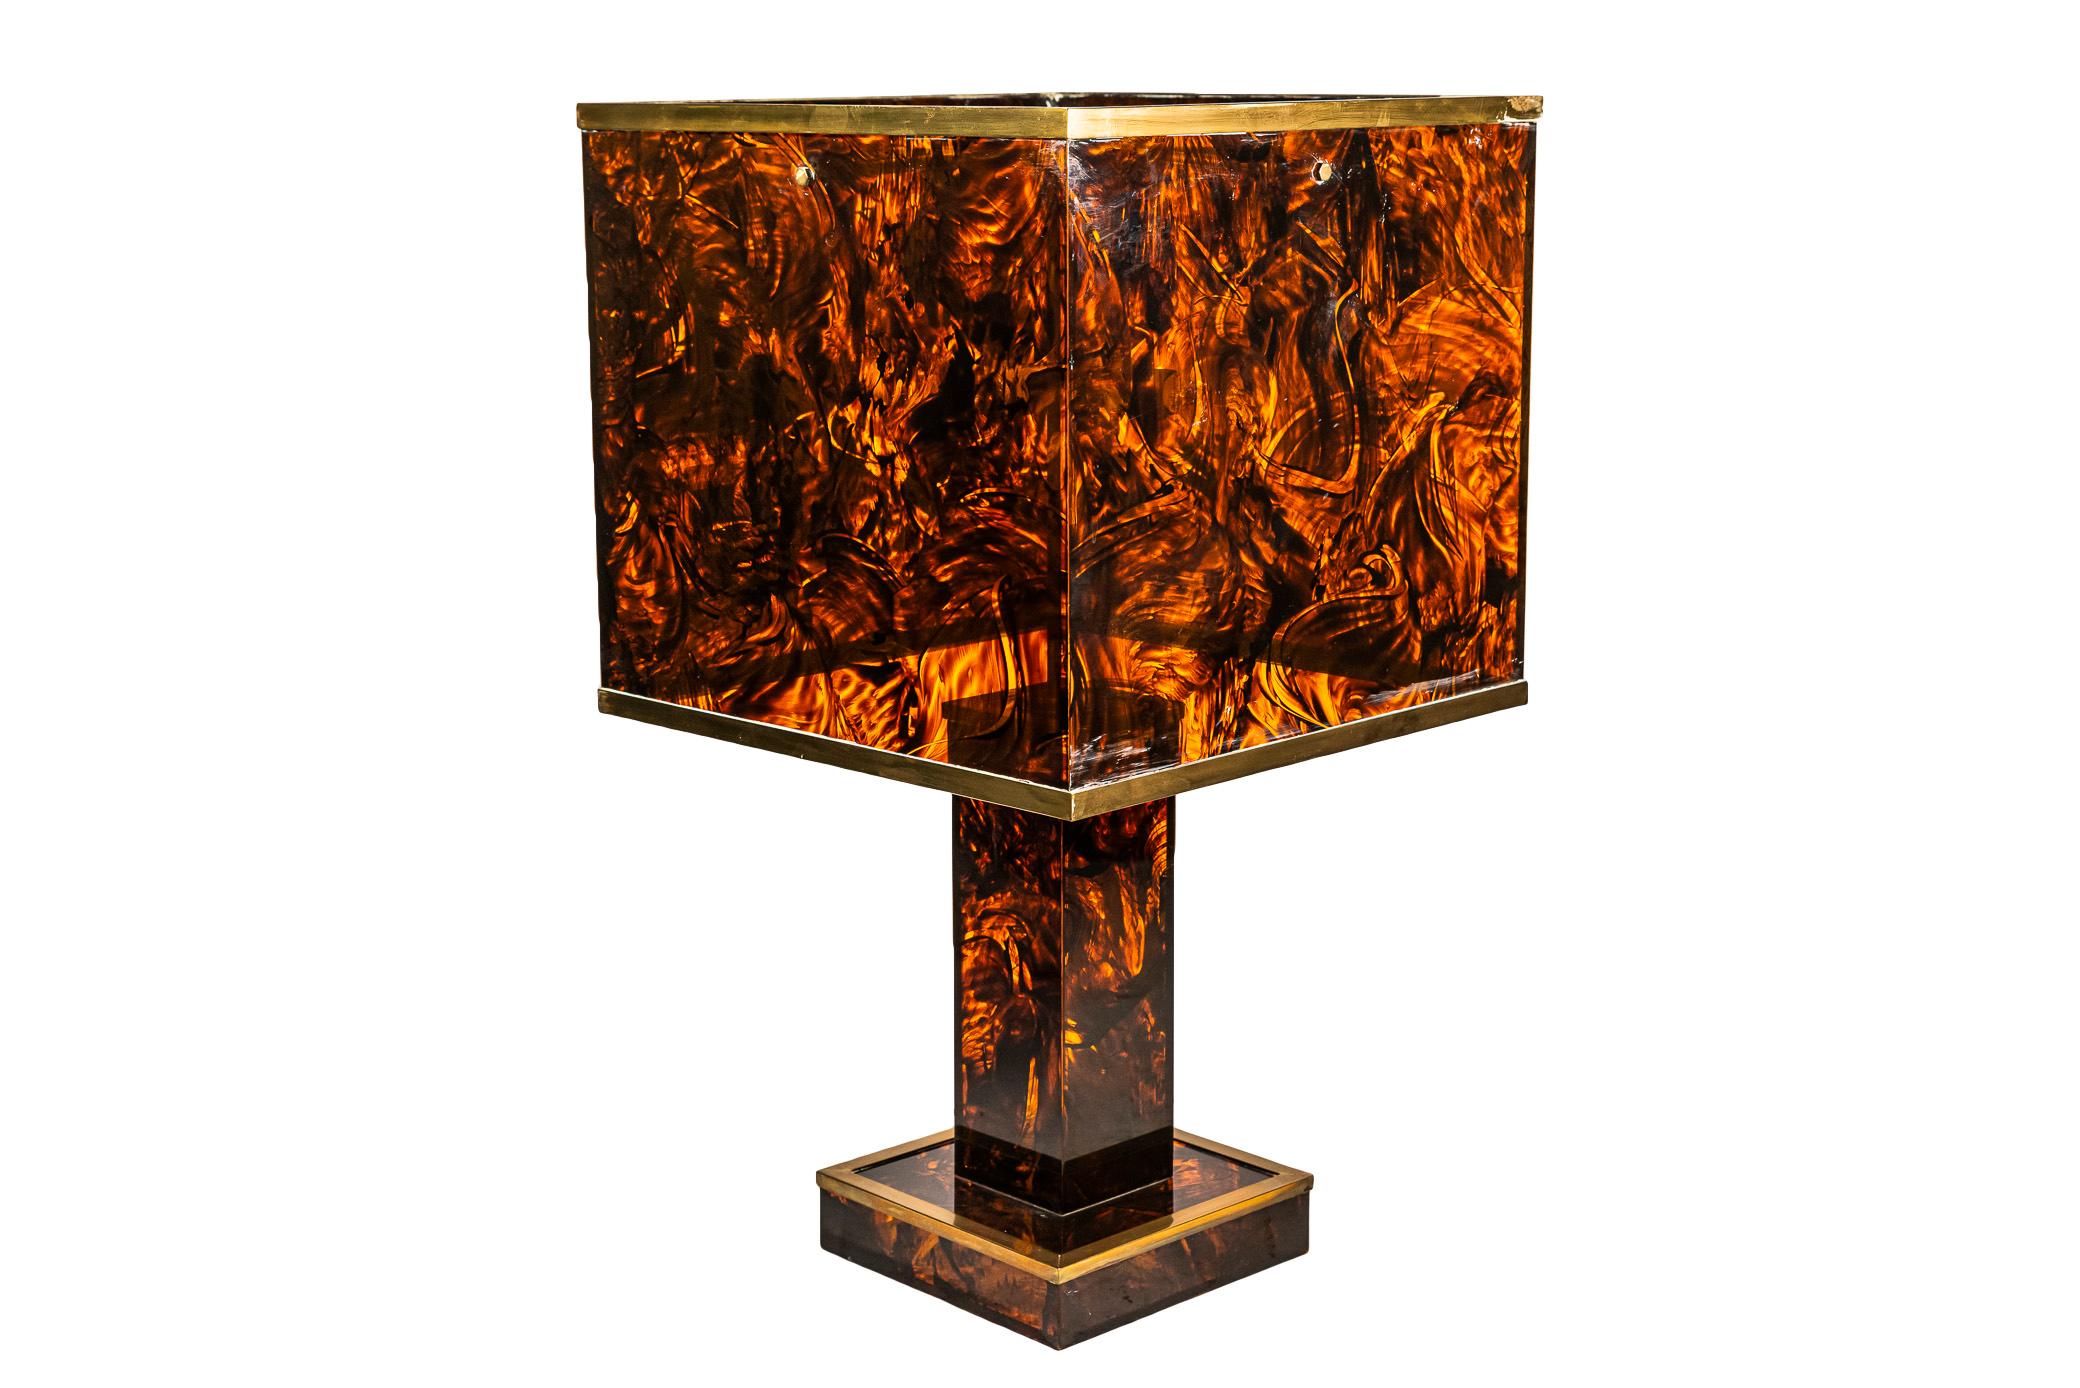 Table lamp,
Plastic in the style of tortoise shell,
Italy, circa 1970.

Measures: width 40 cm, depth 40 cm, height 71 cm.